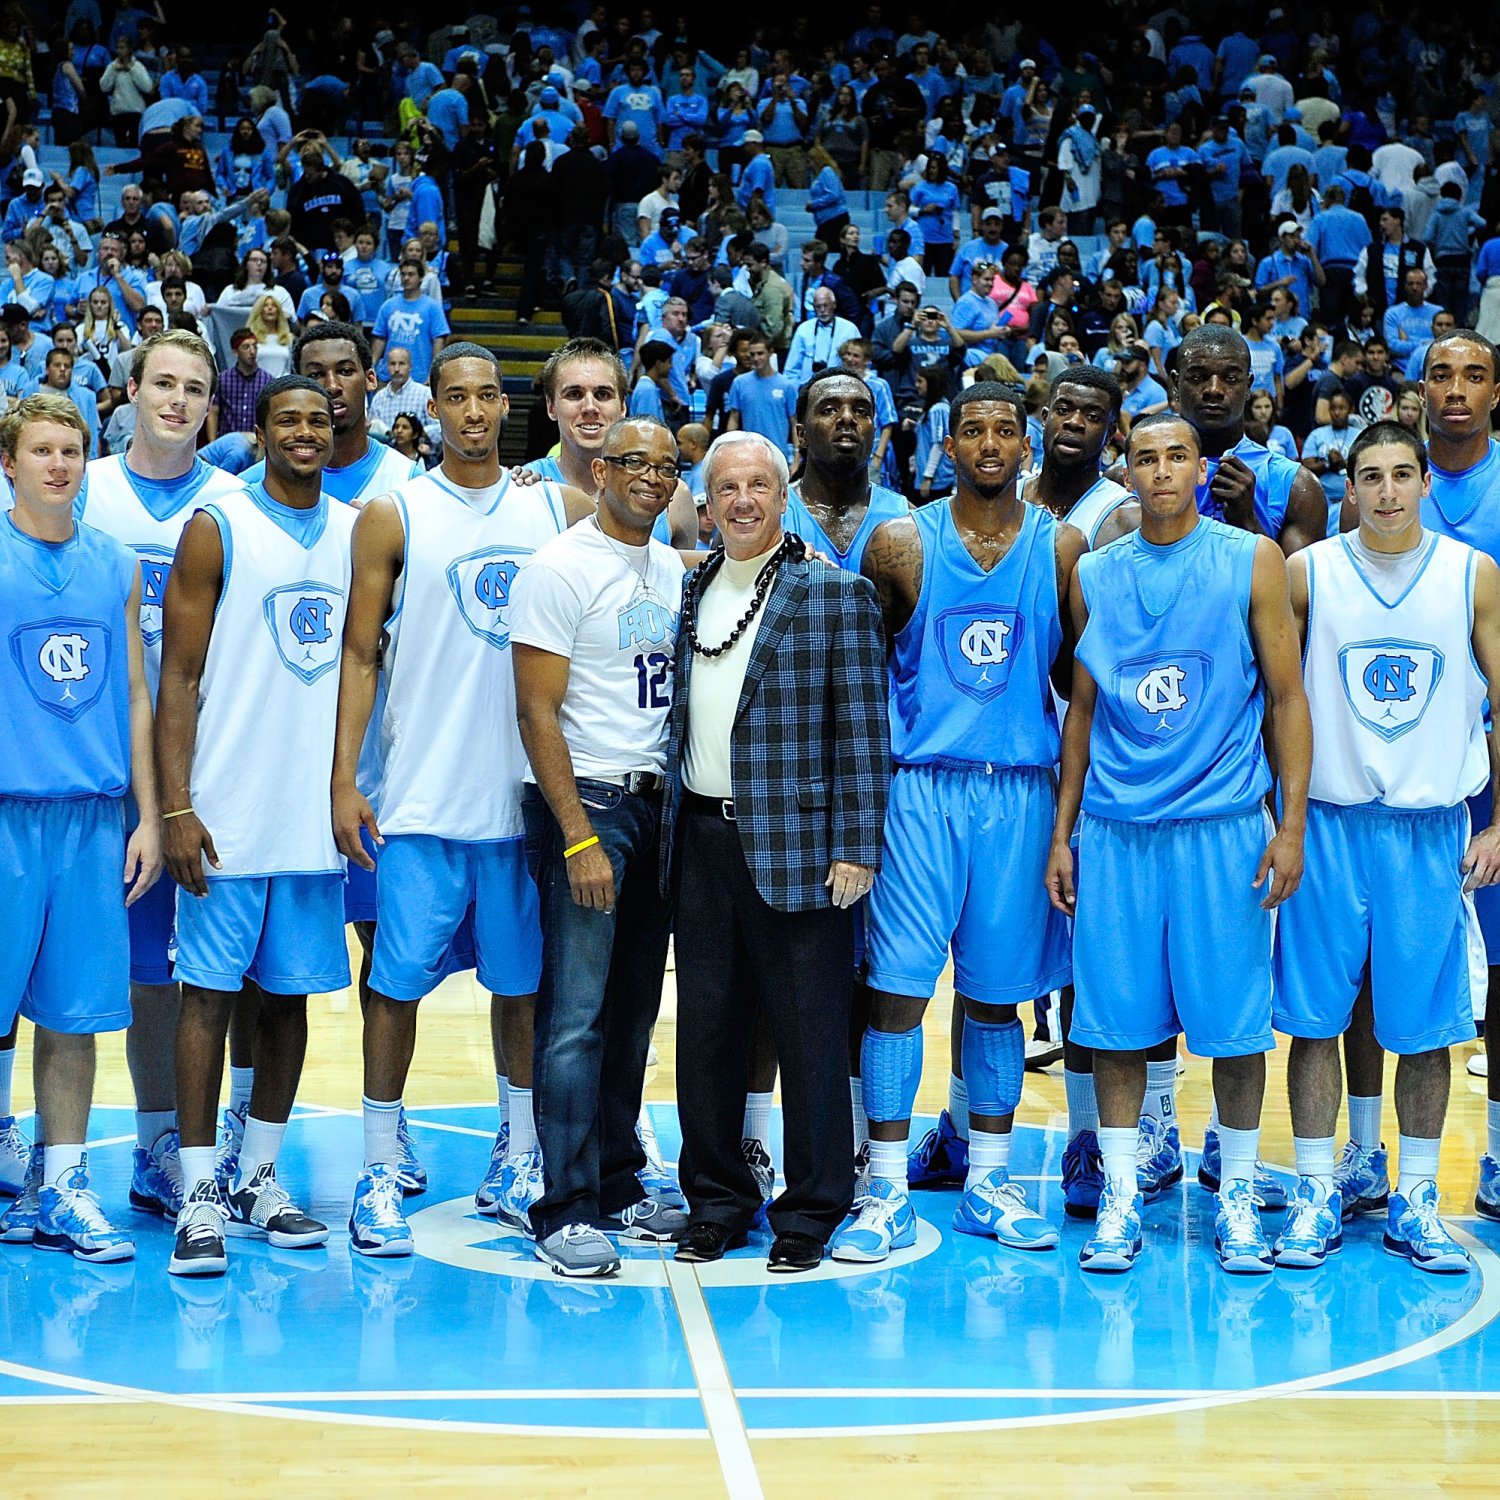 North Carolina Basketball Why This Year's Team Is Superior to the 2011